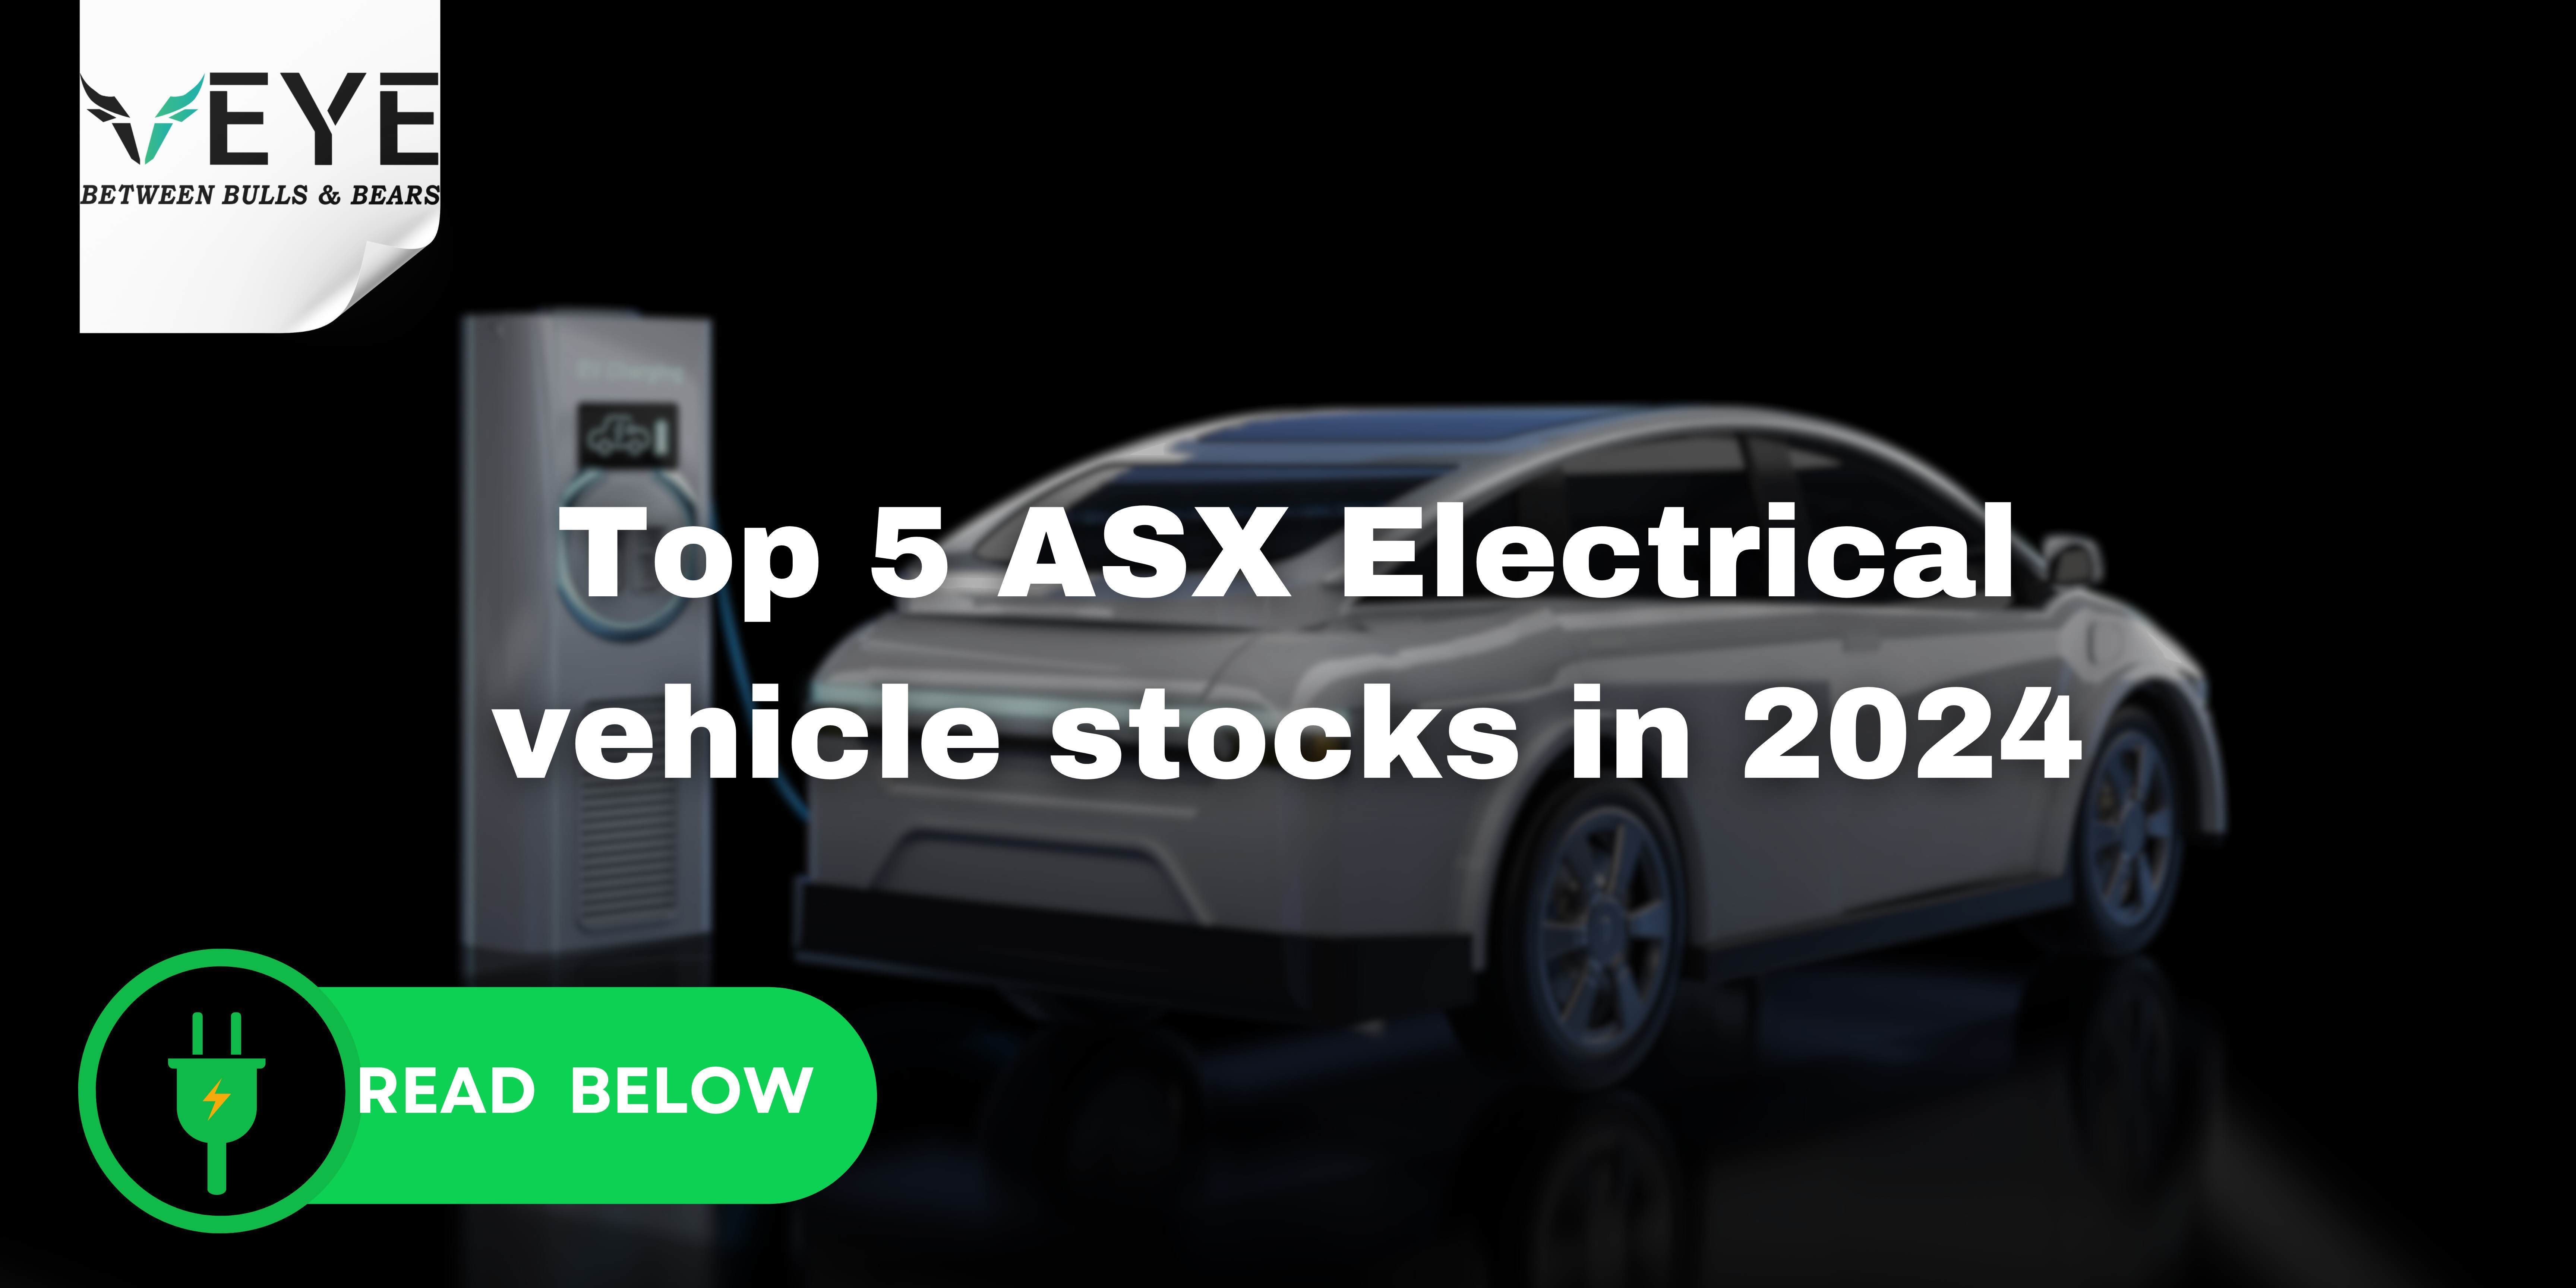 Top 5 ASX Electrical Vehicle Stocks in 2024